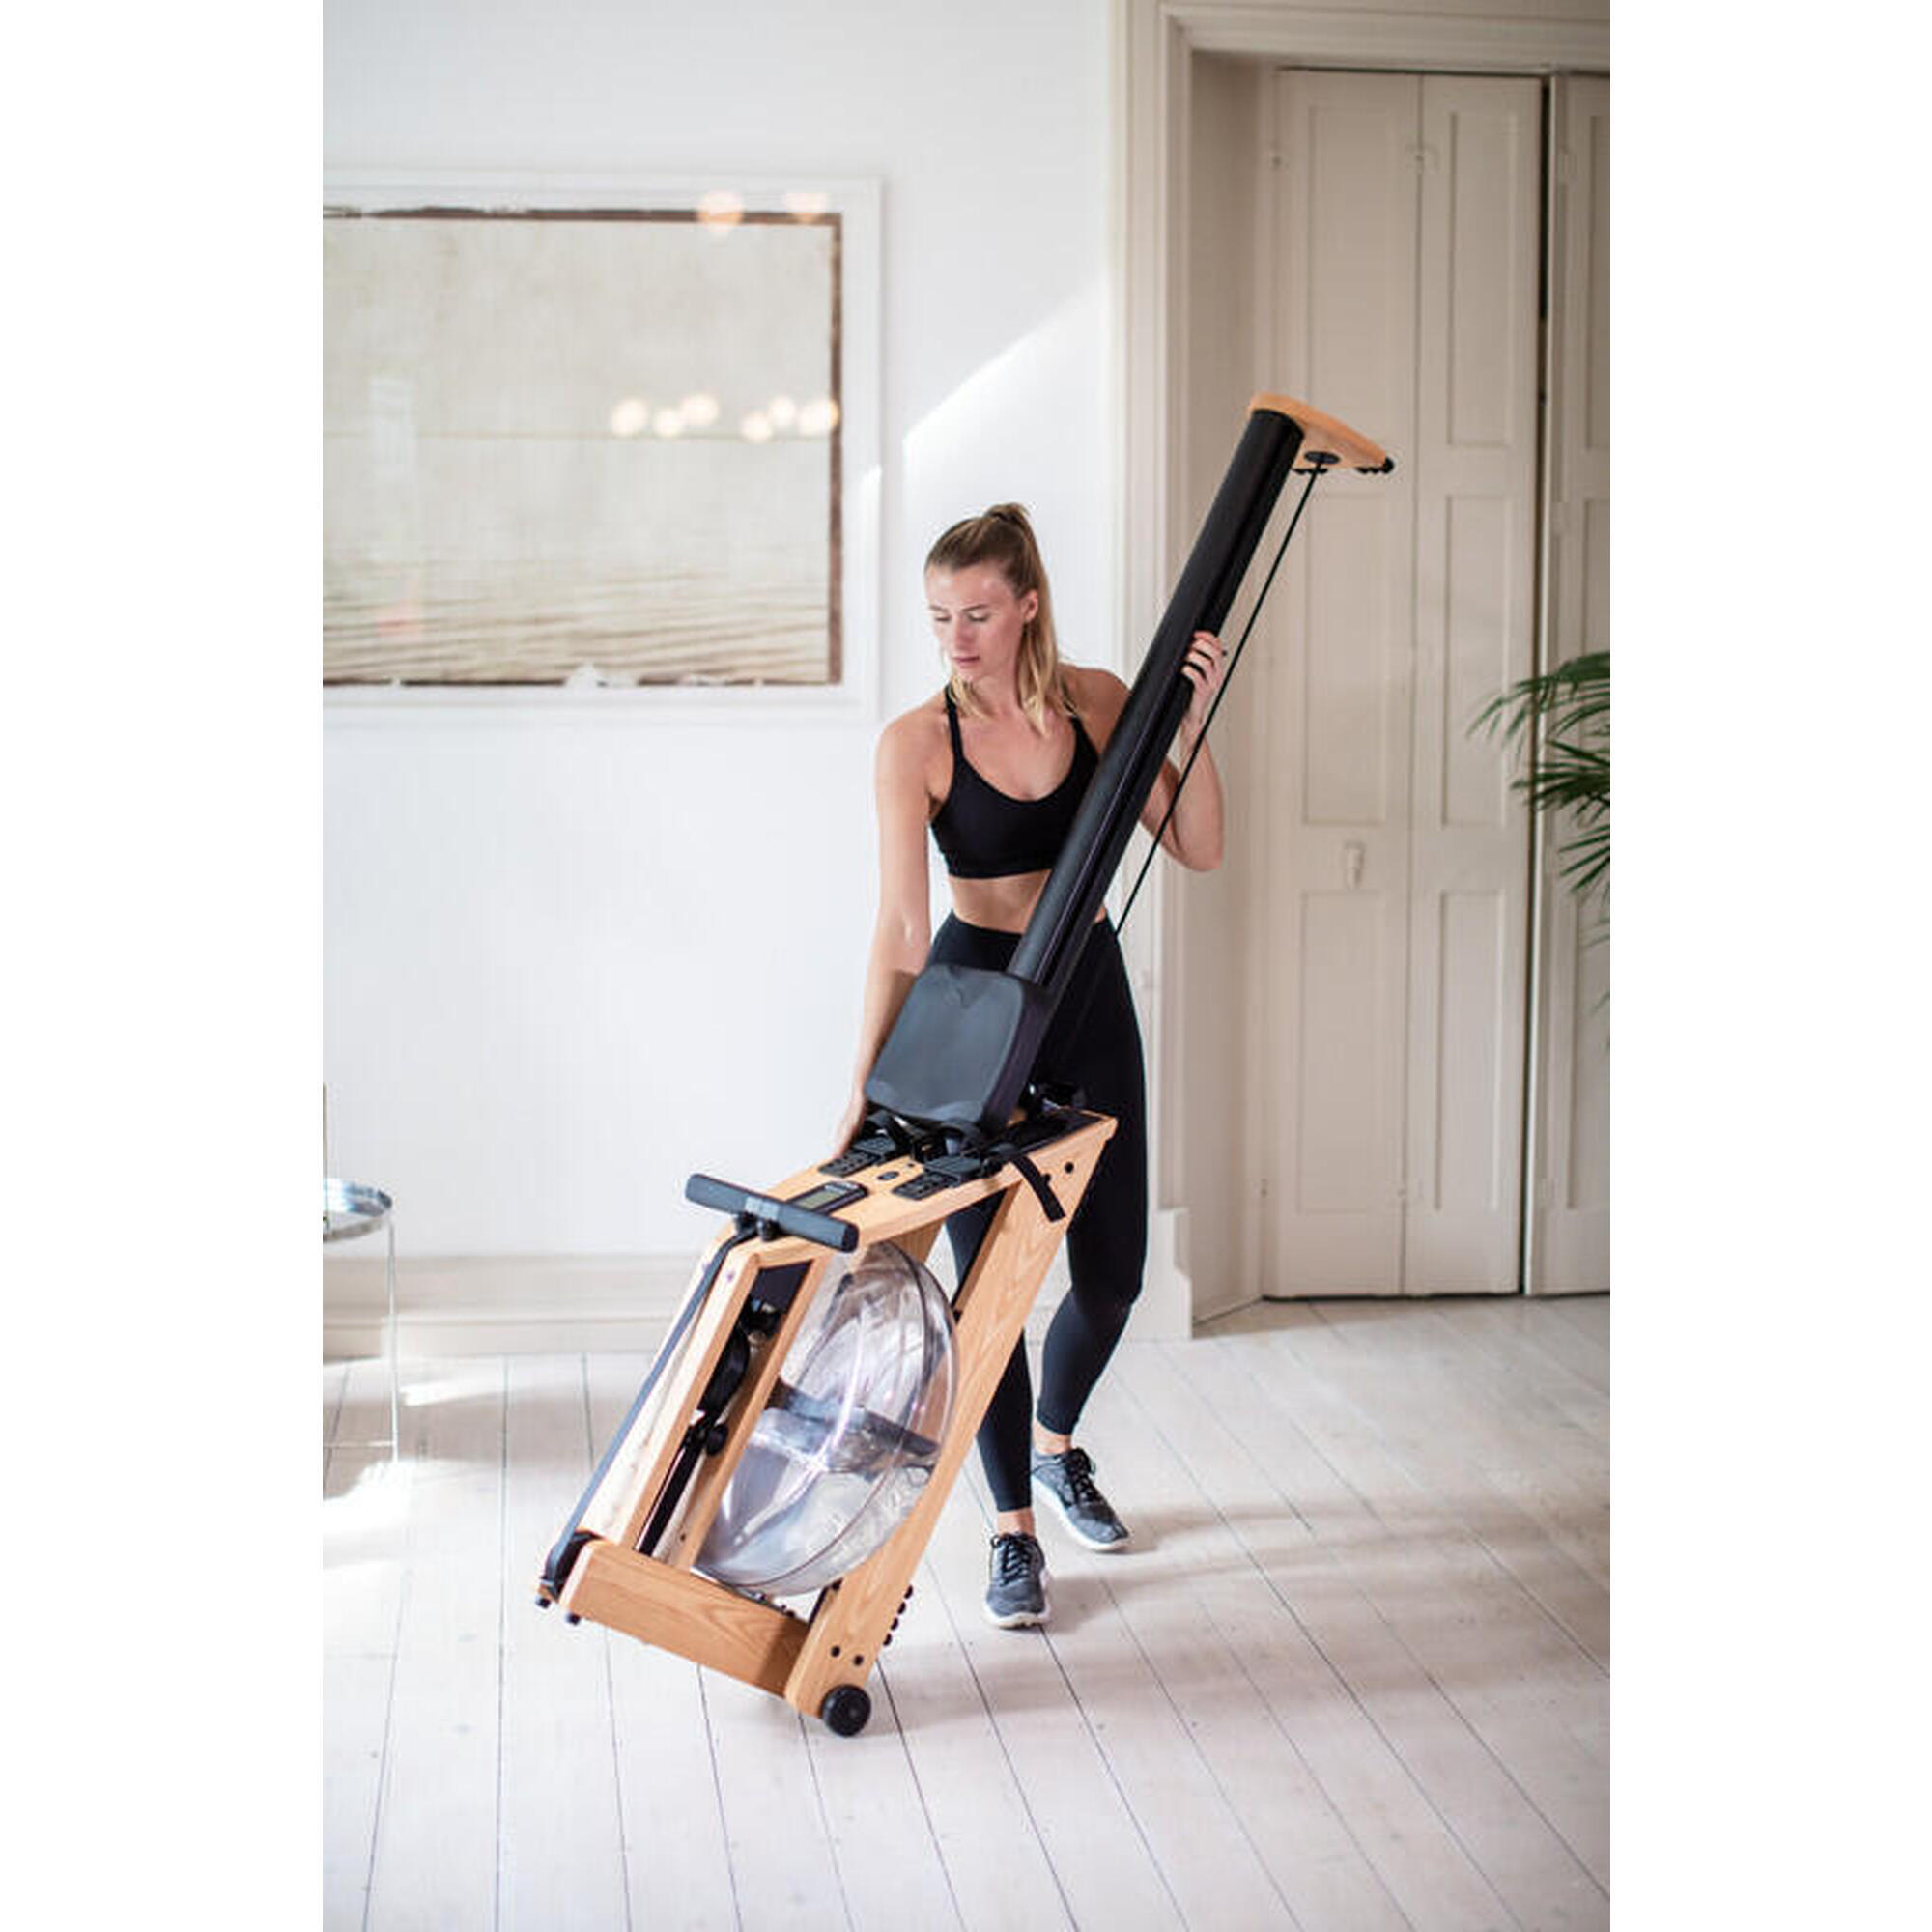 Maquina de Remo - Fitness - Waterrower A1 Madera